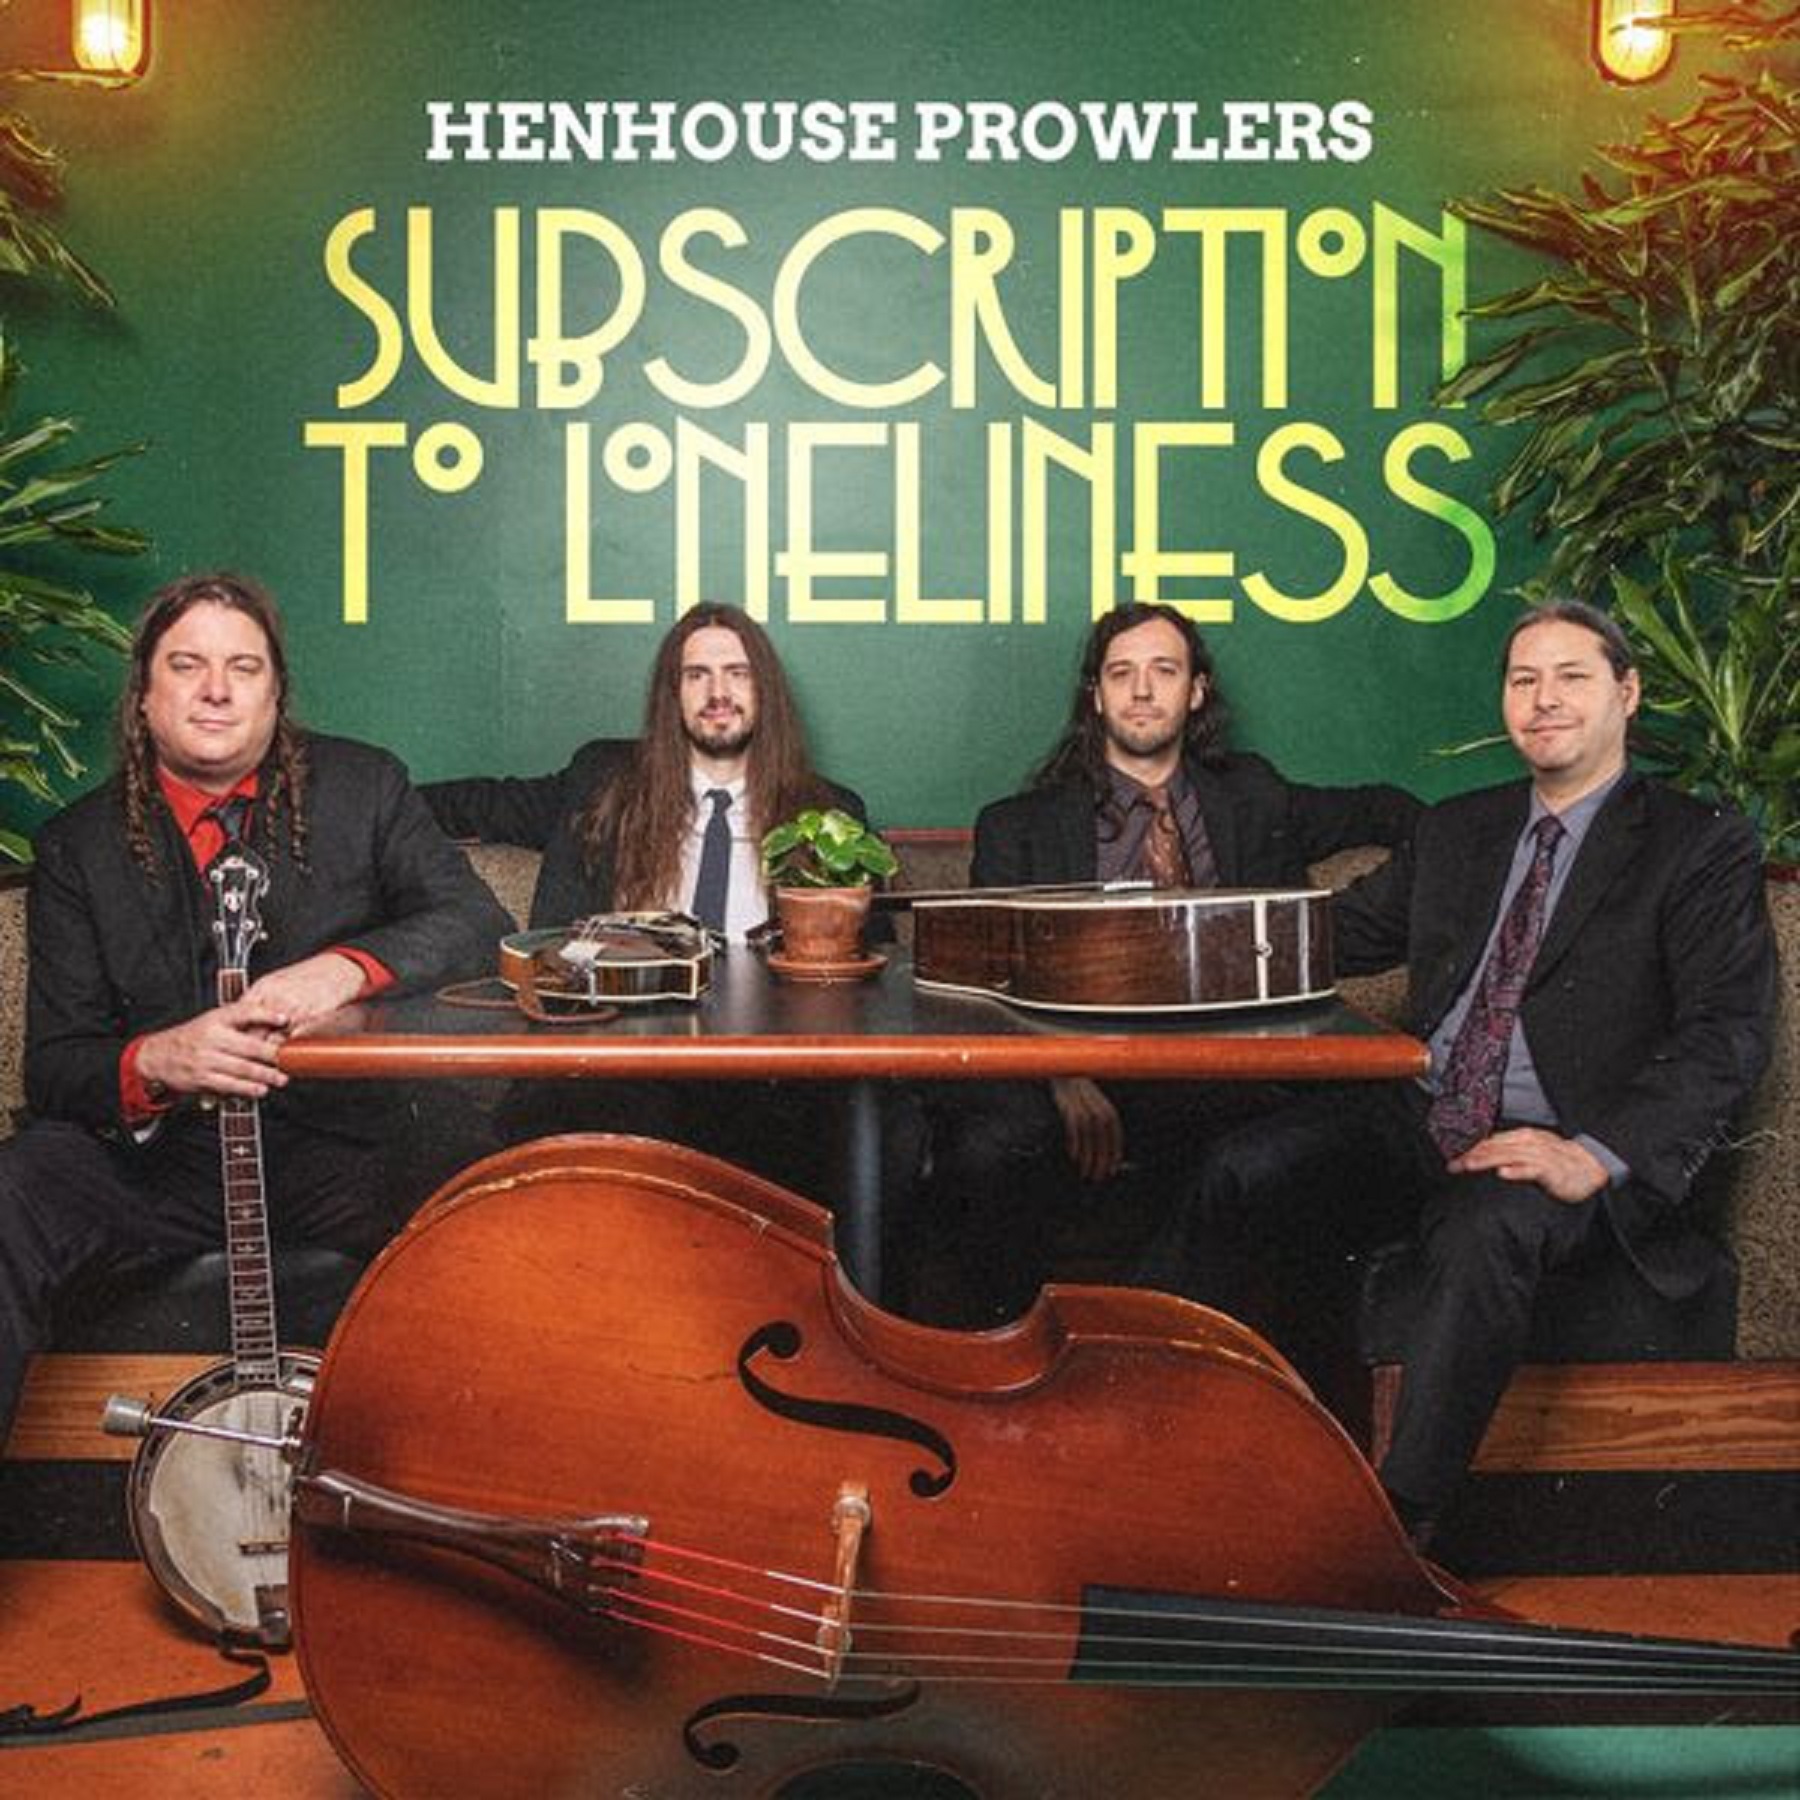 Henhouse Prowlers release new single "Subscription To Loneliness"